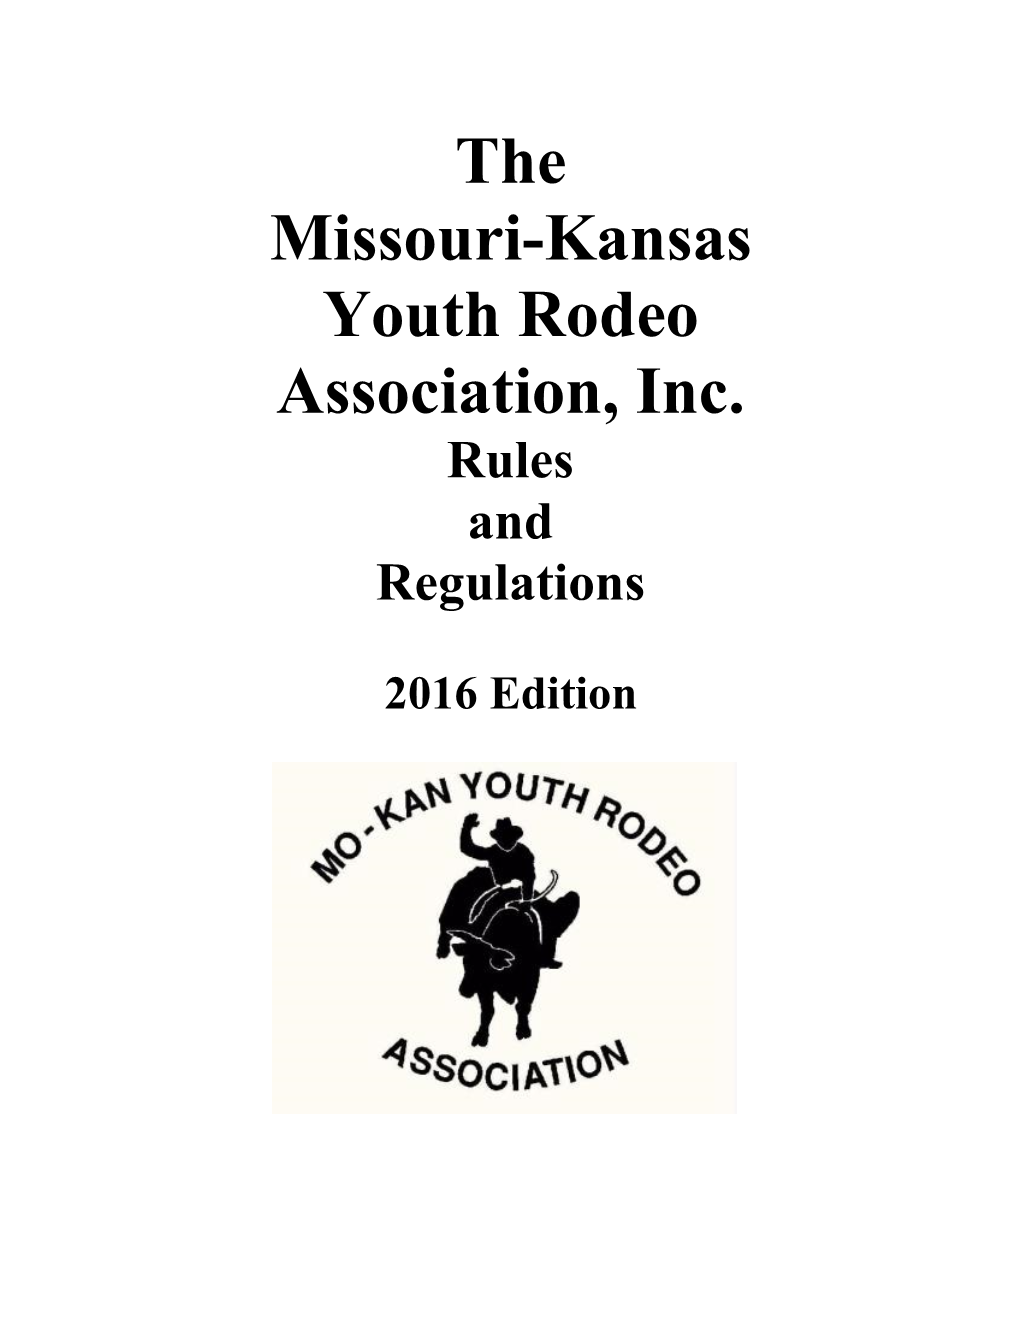 The Missouri-Kansas Youth Rodeo Association, Inc. Rules and Regulations